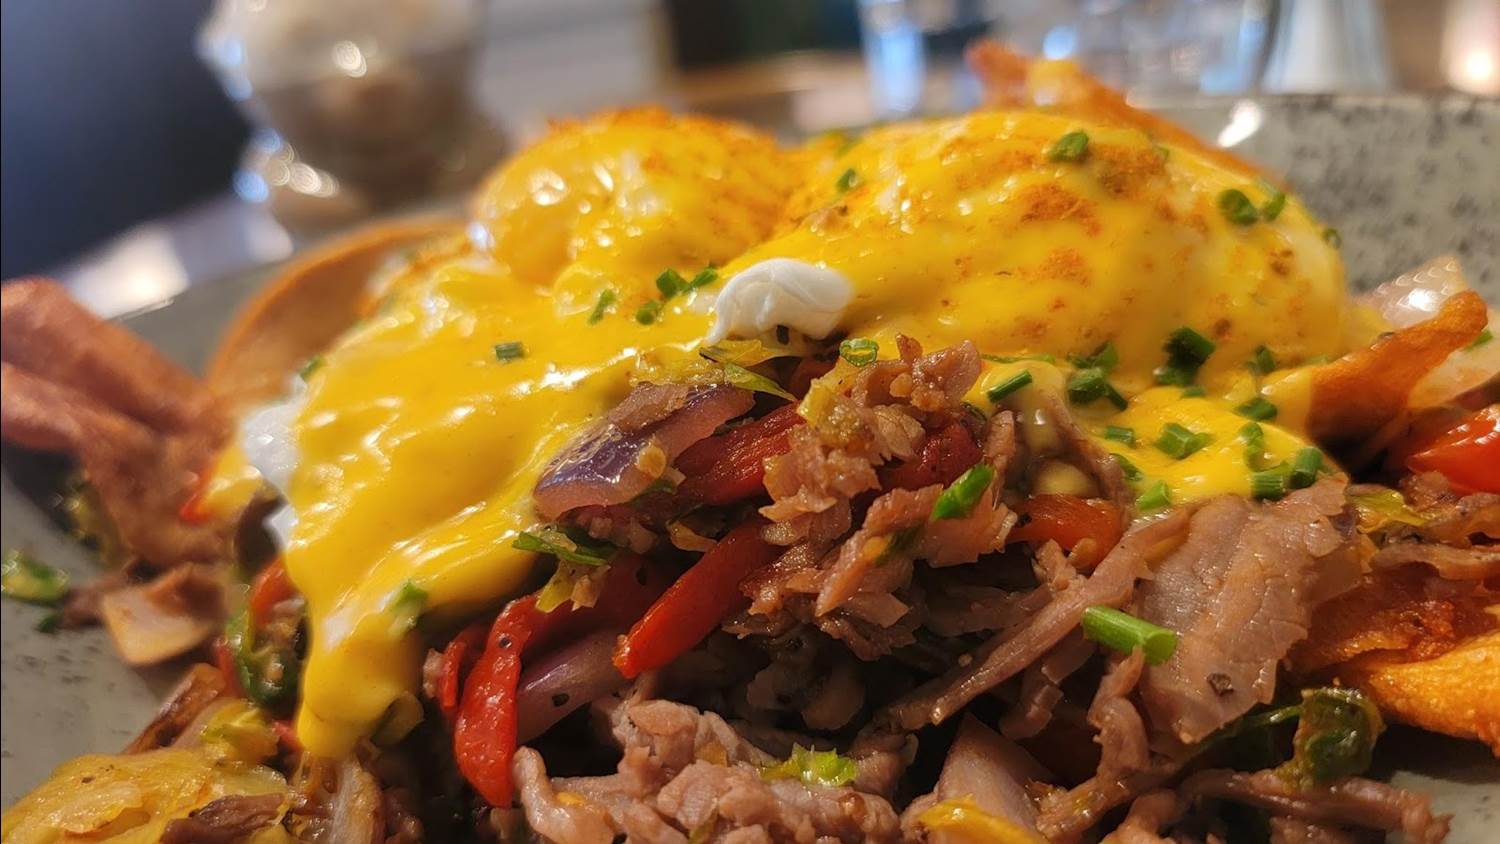 Magnificently soft cooked eggs under the hollandaise broke beautifully over the hearty ribeye hash. The thick cut potato chips while flavorful didn’t add to the dish due to their super crispy texture and had me wishing for traditional crispy diced potatoes.